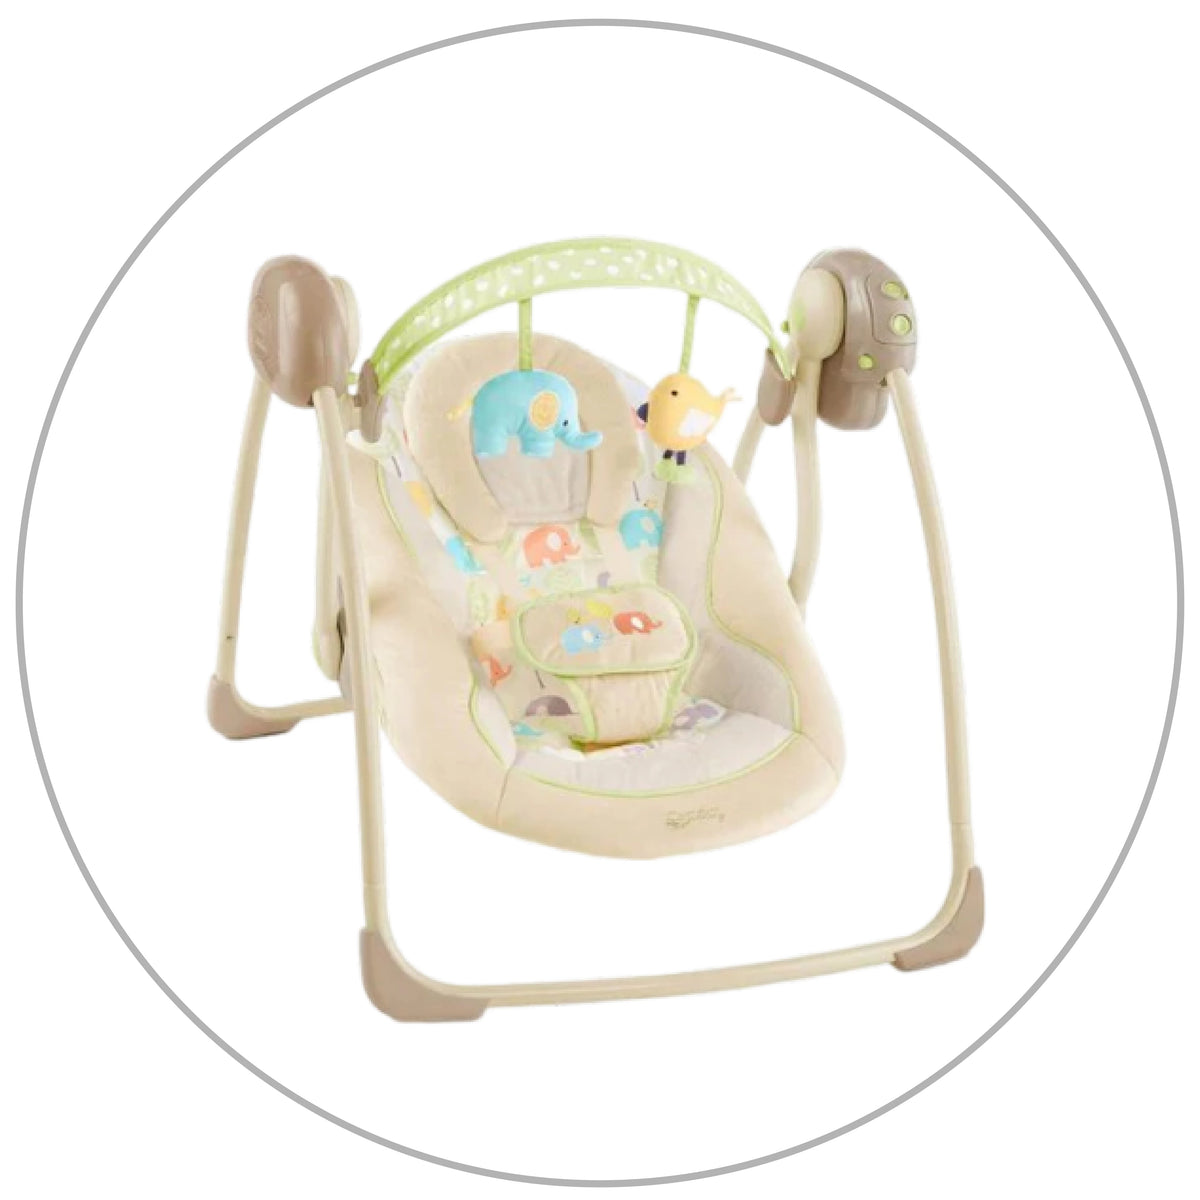 Buy Online Baby Swings & Bouncers at Affordable Prices – Infantino